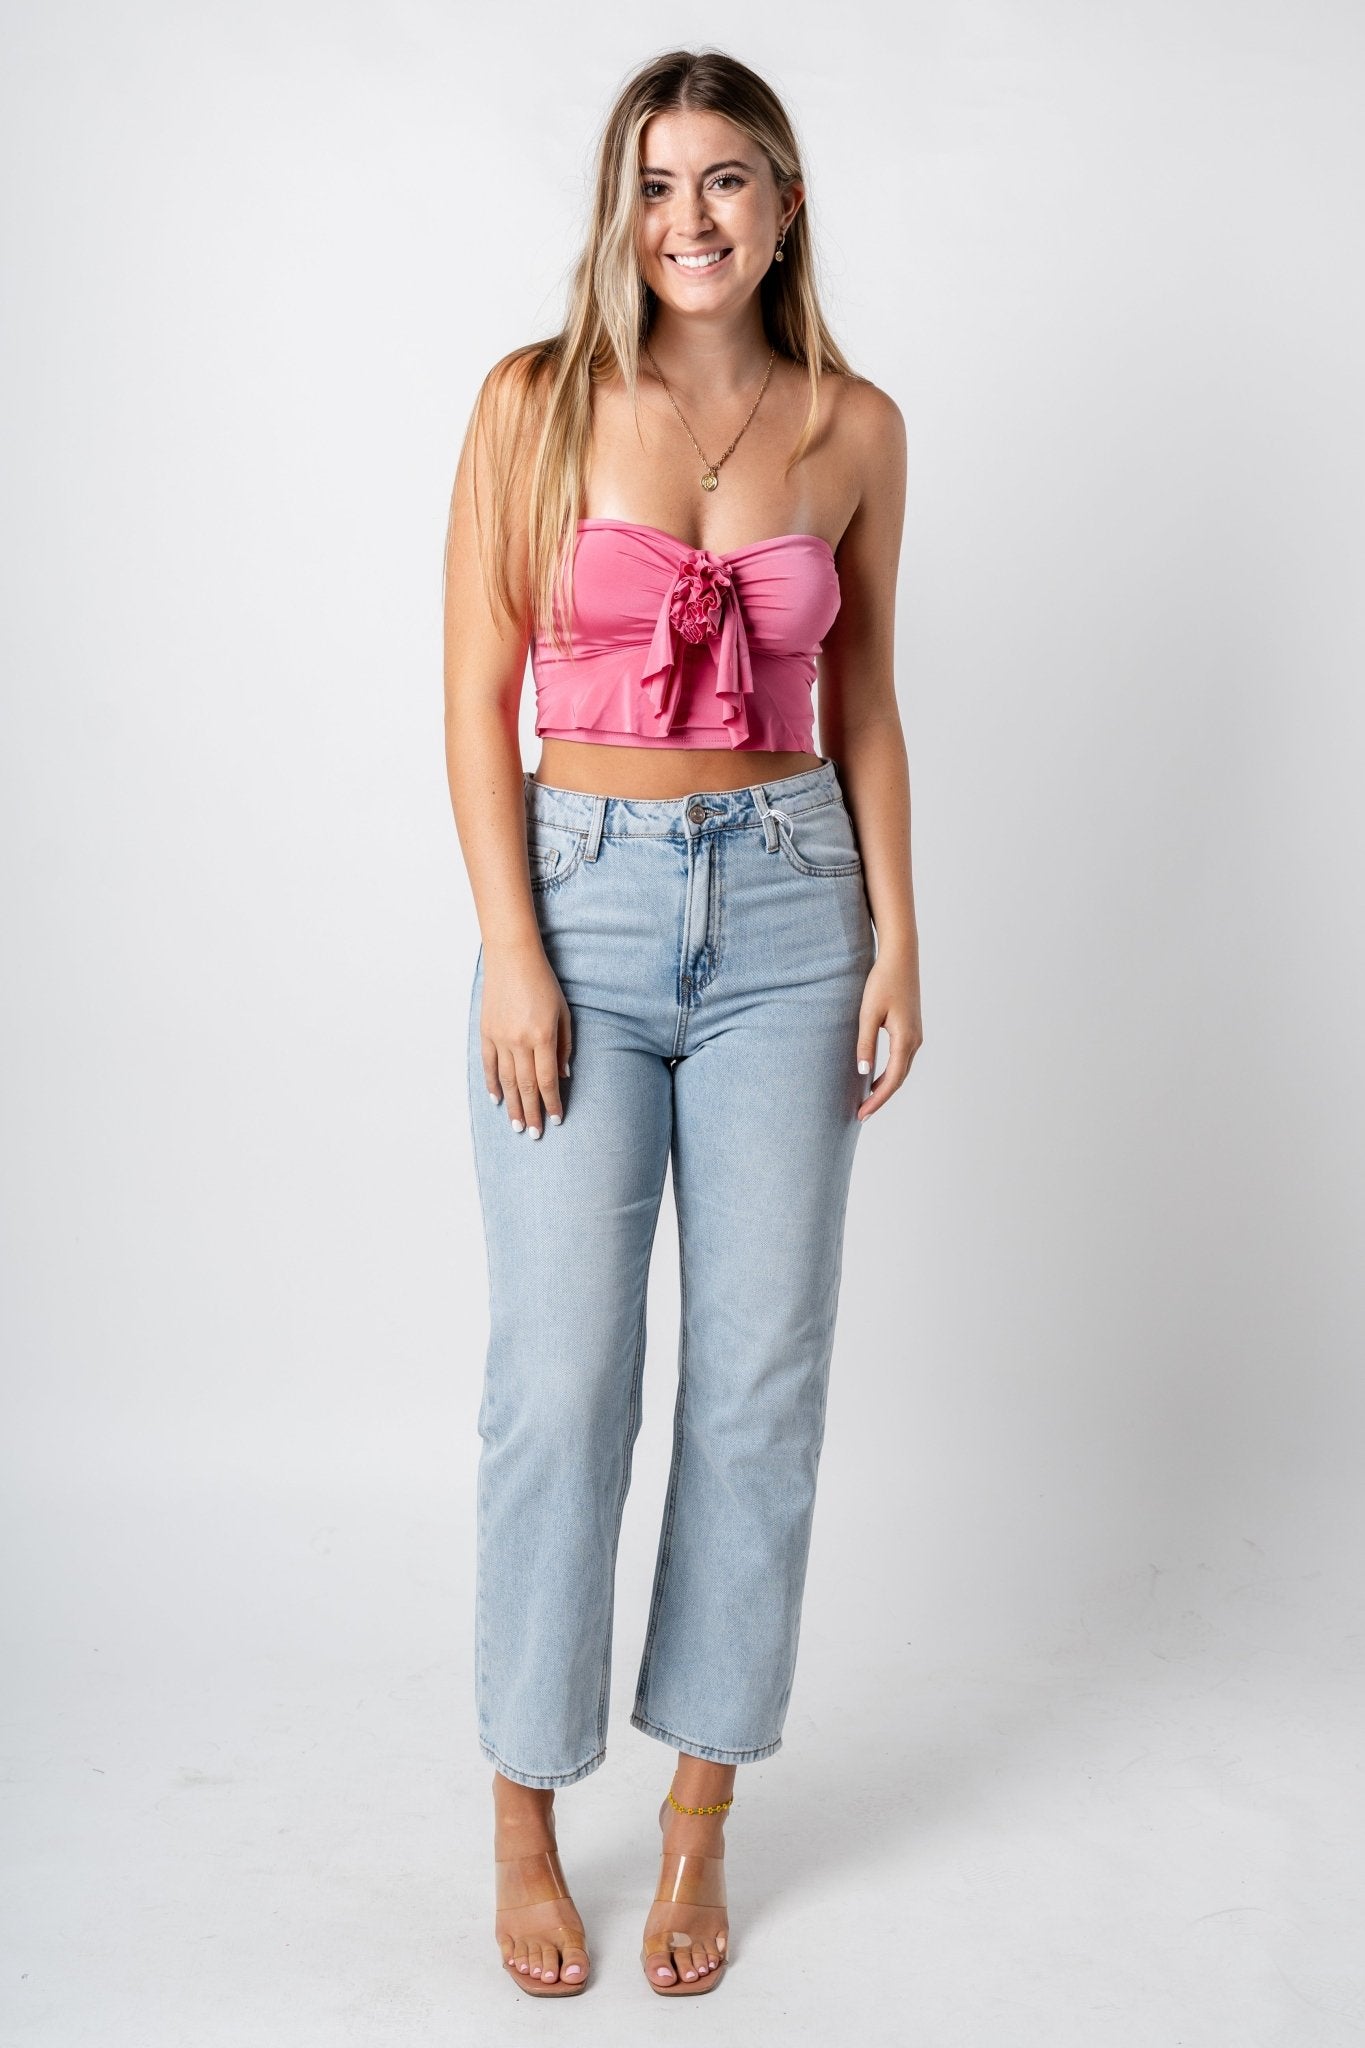 Rosette ruffle tube top candy pink - Trendy Valentine's T-Shirts at Lush Fashion Lounge Boutique in Oklahoma City